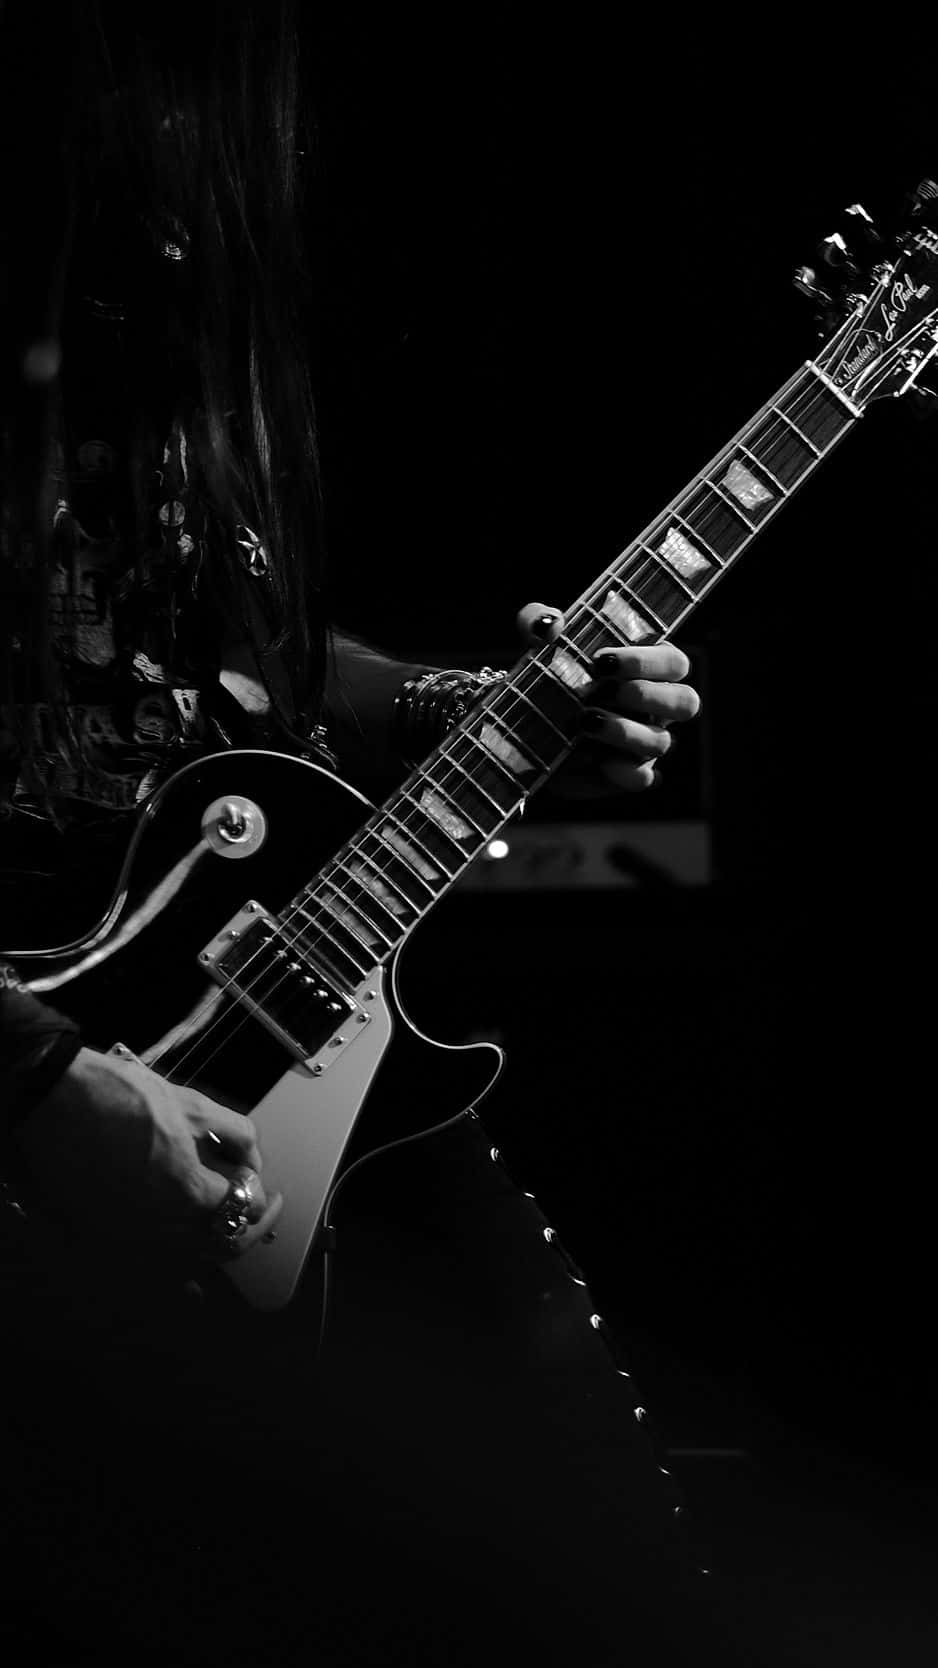 Black And White Electric Guitar Aesthetic Background